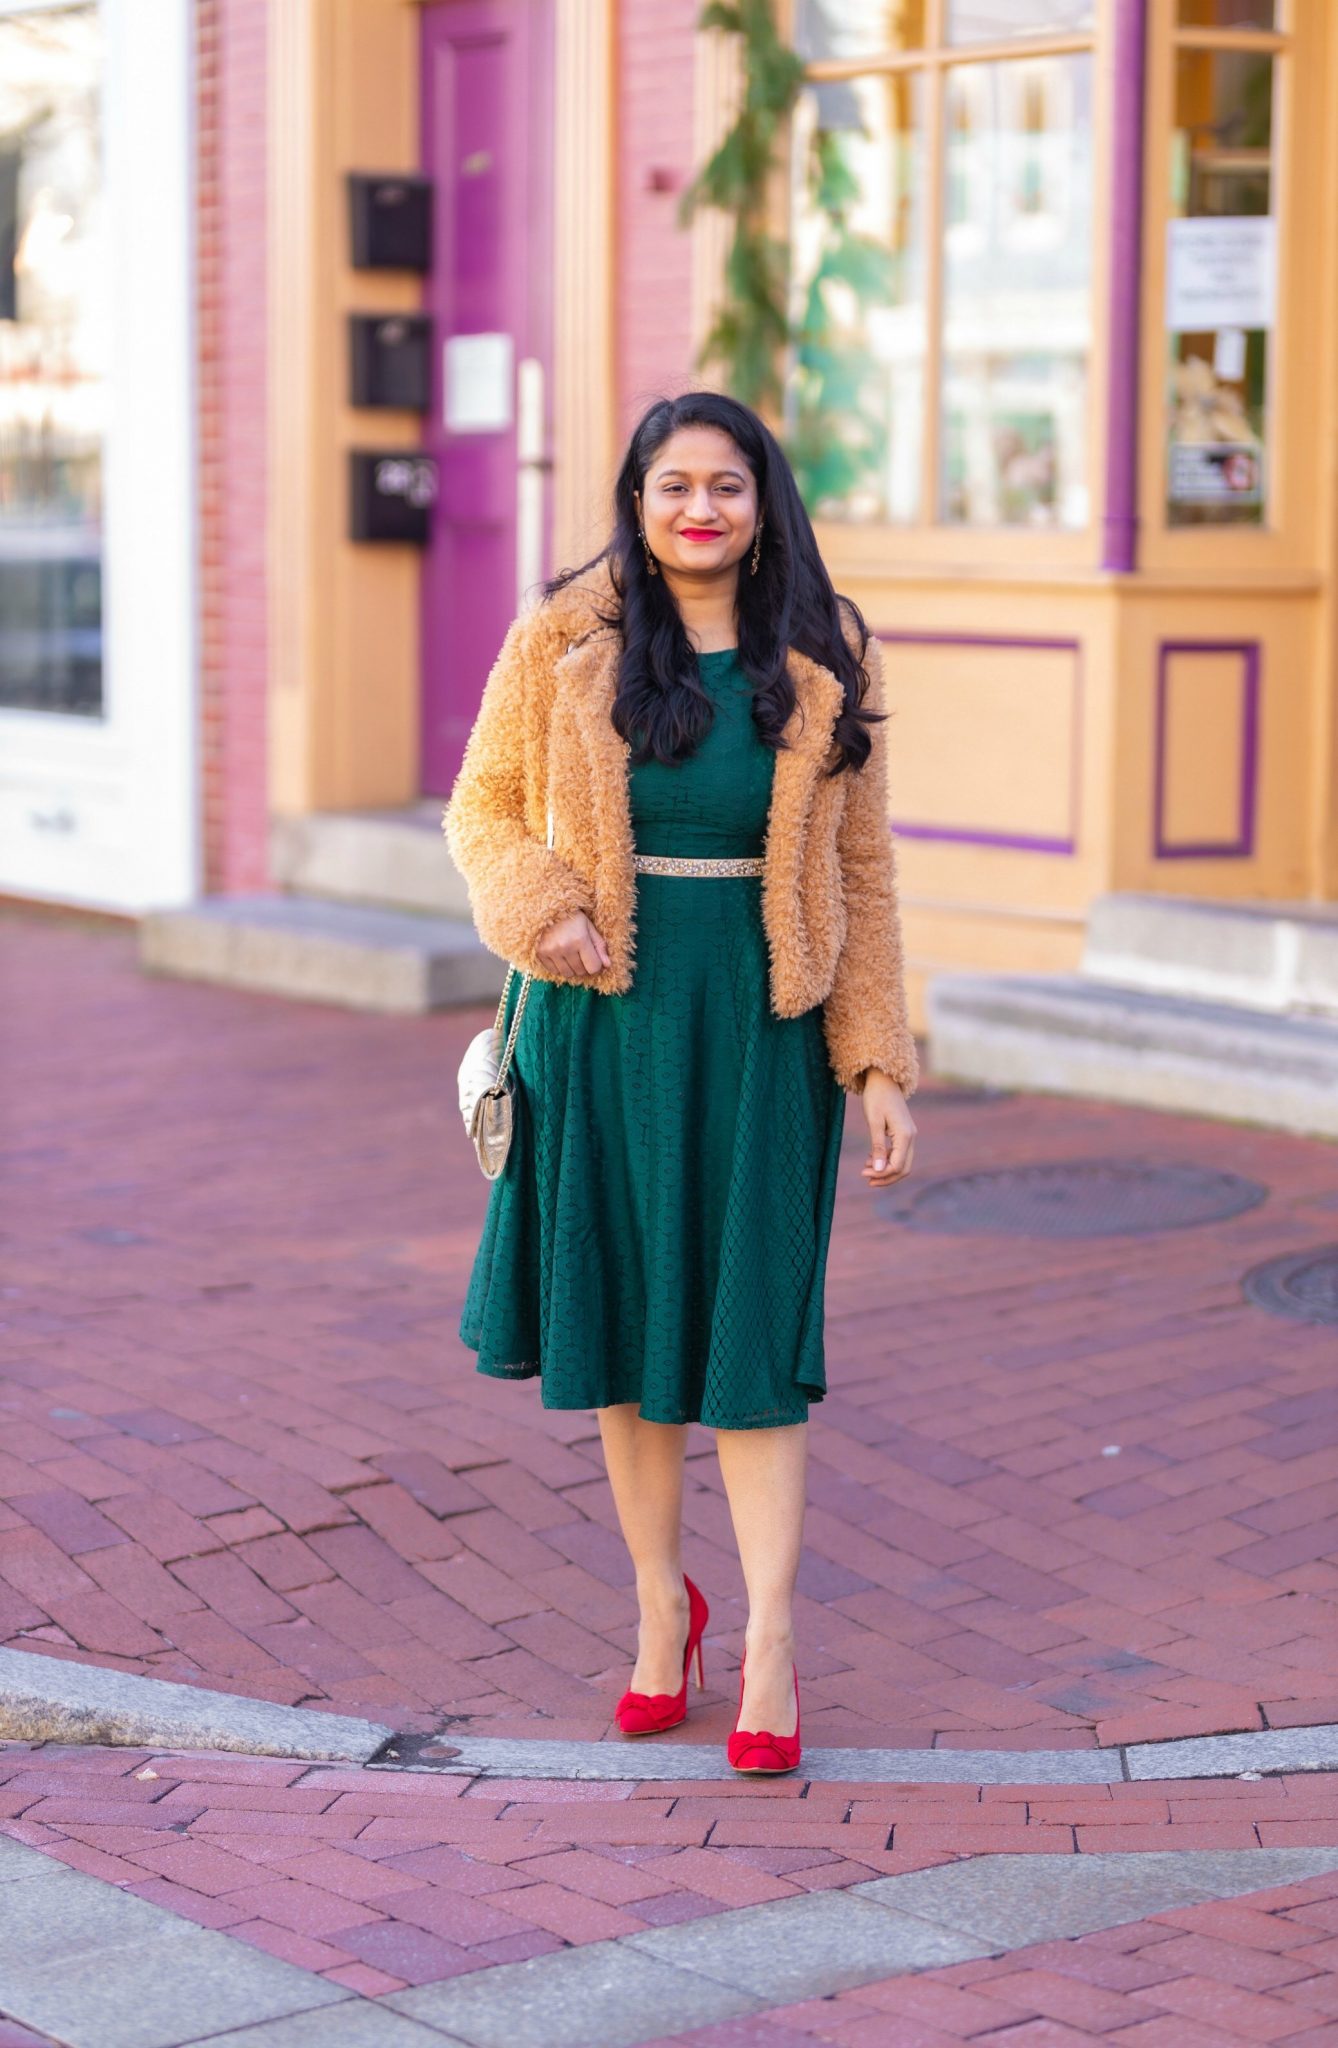 5 Stylish And Christmas Party Outfits